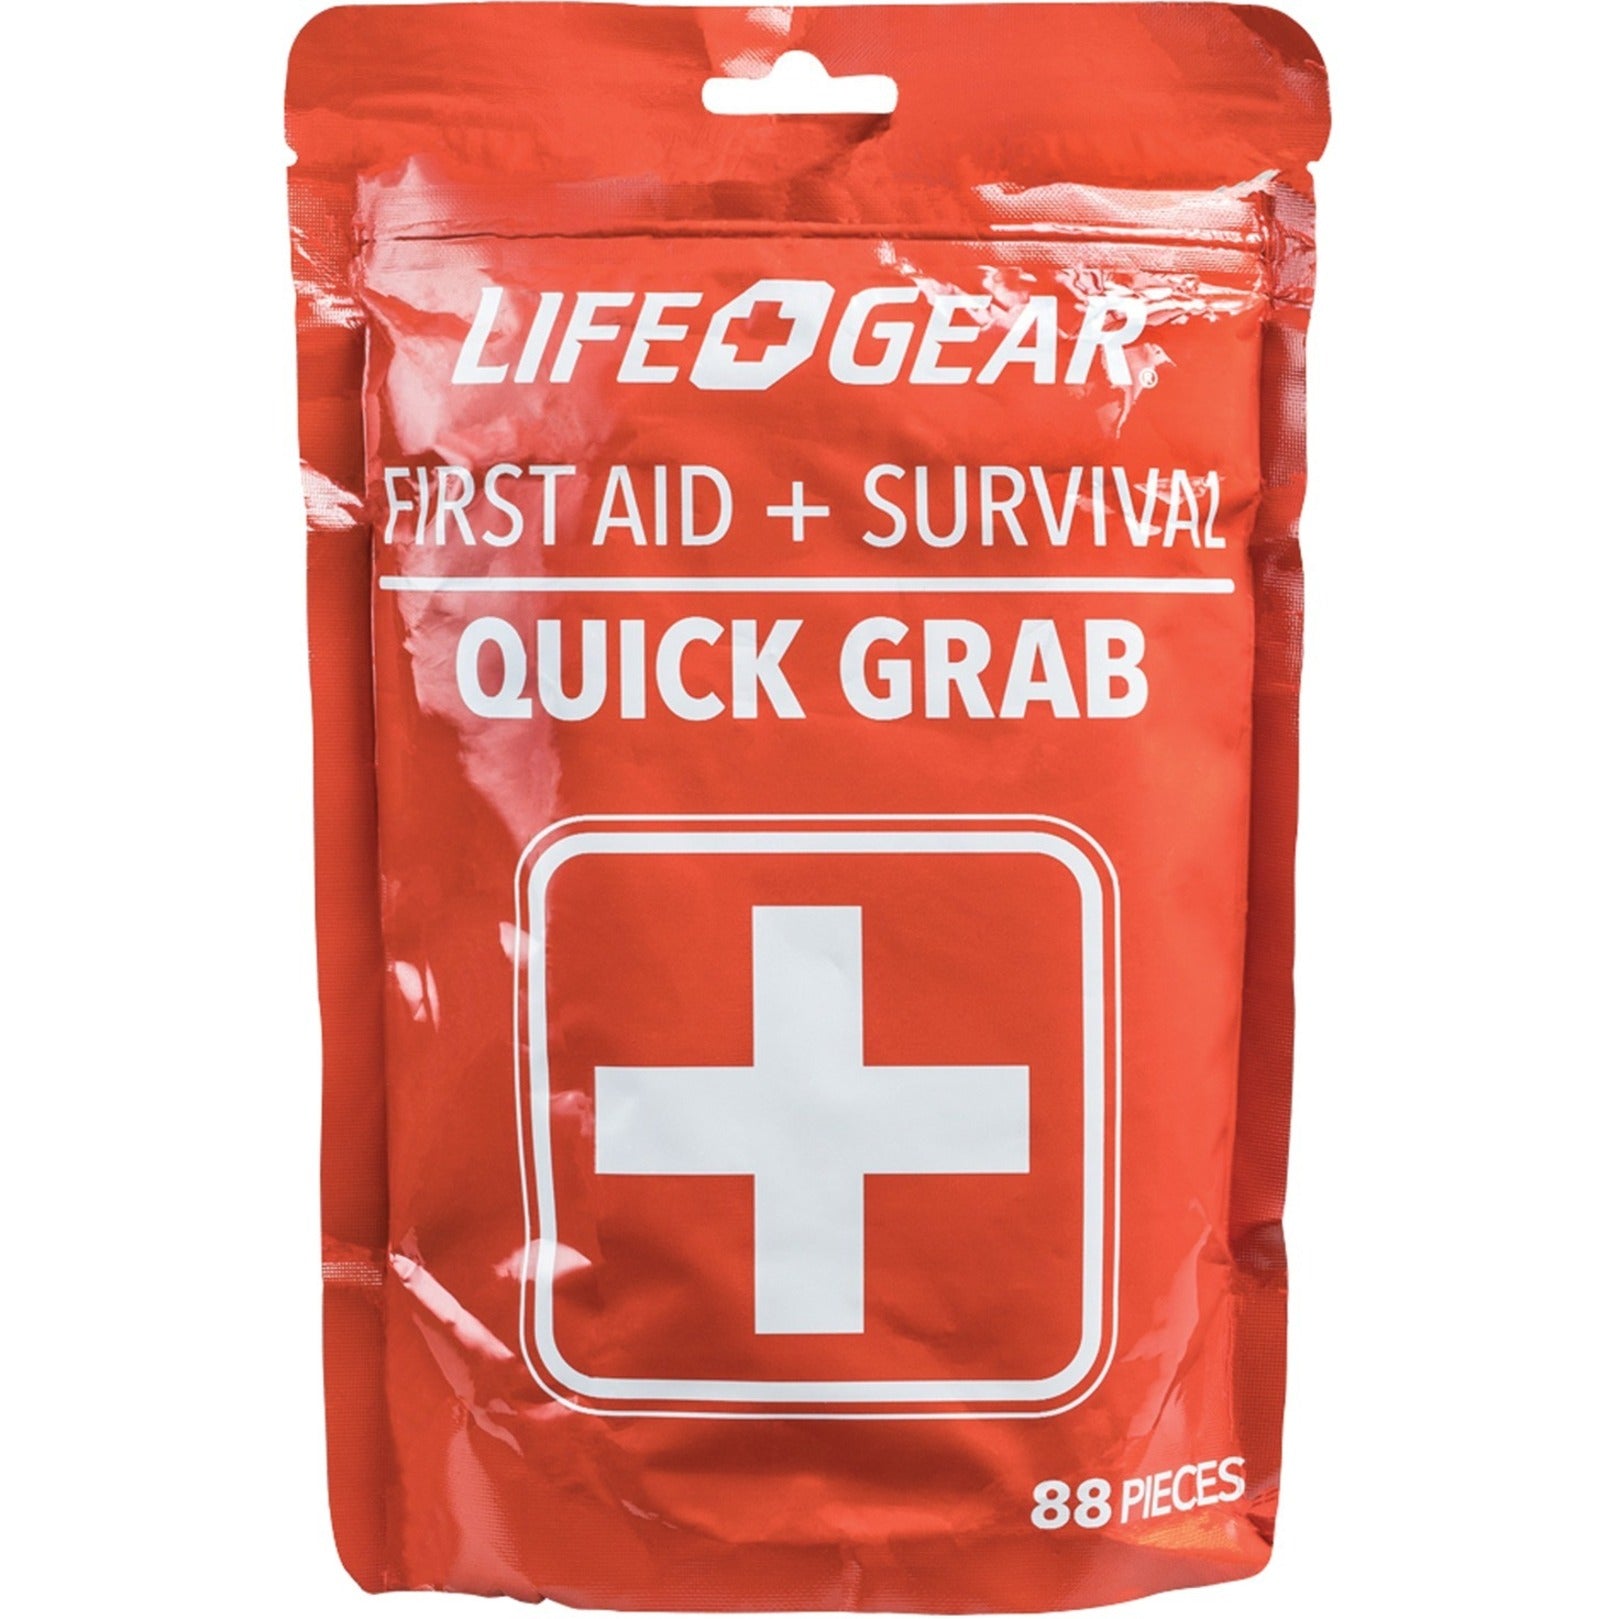 Life+Gear 41-3819 Quick Grab First Aid & Survival Kit, 88-Piece, Waterproof Case, Red